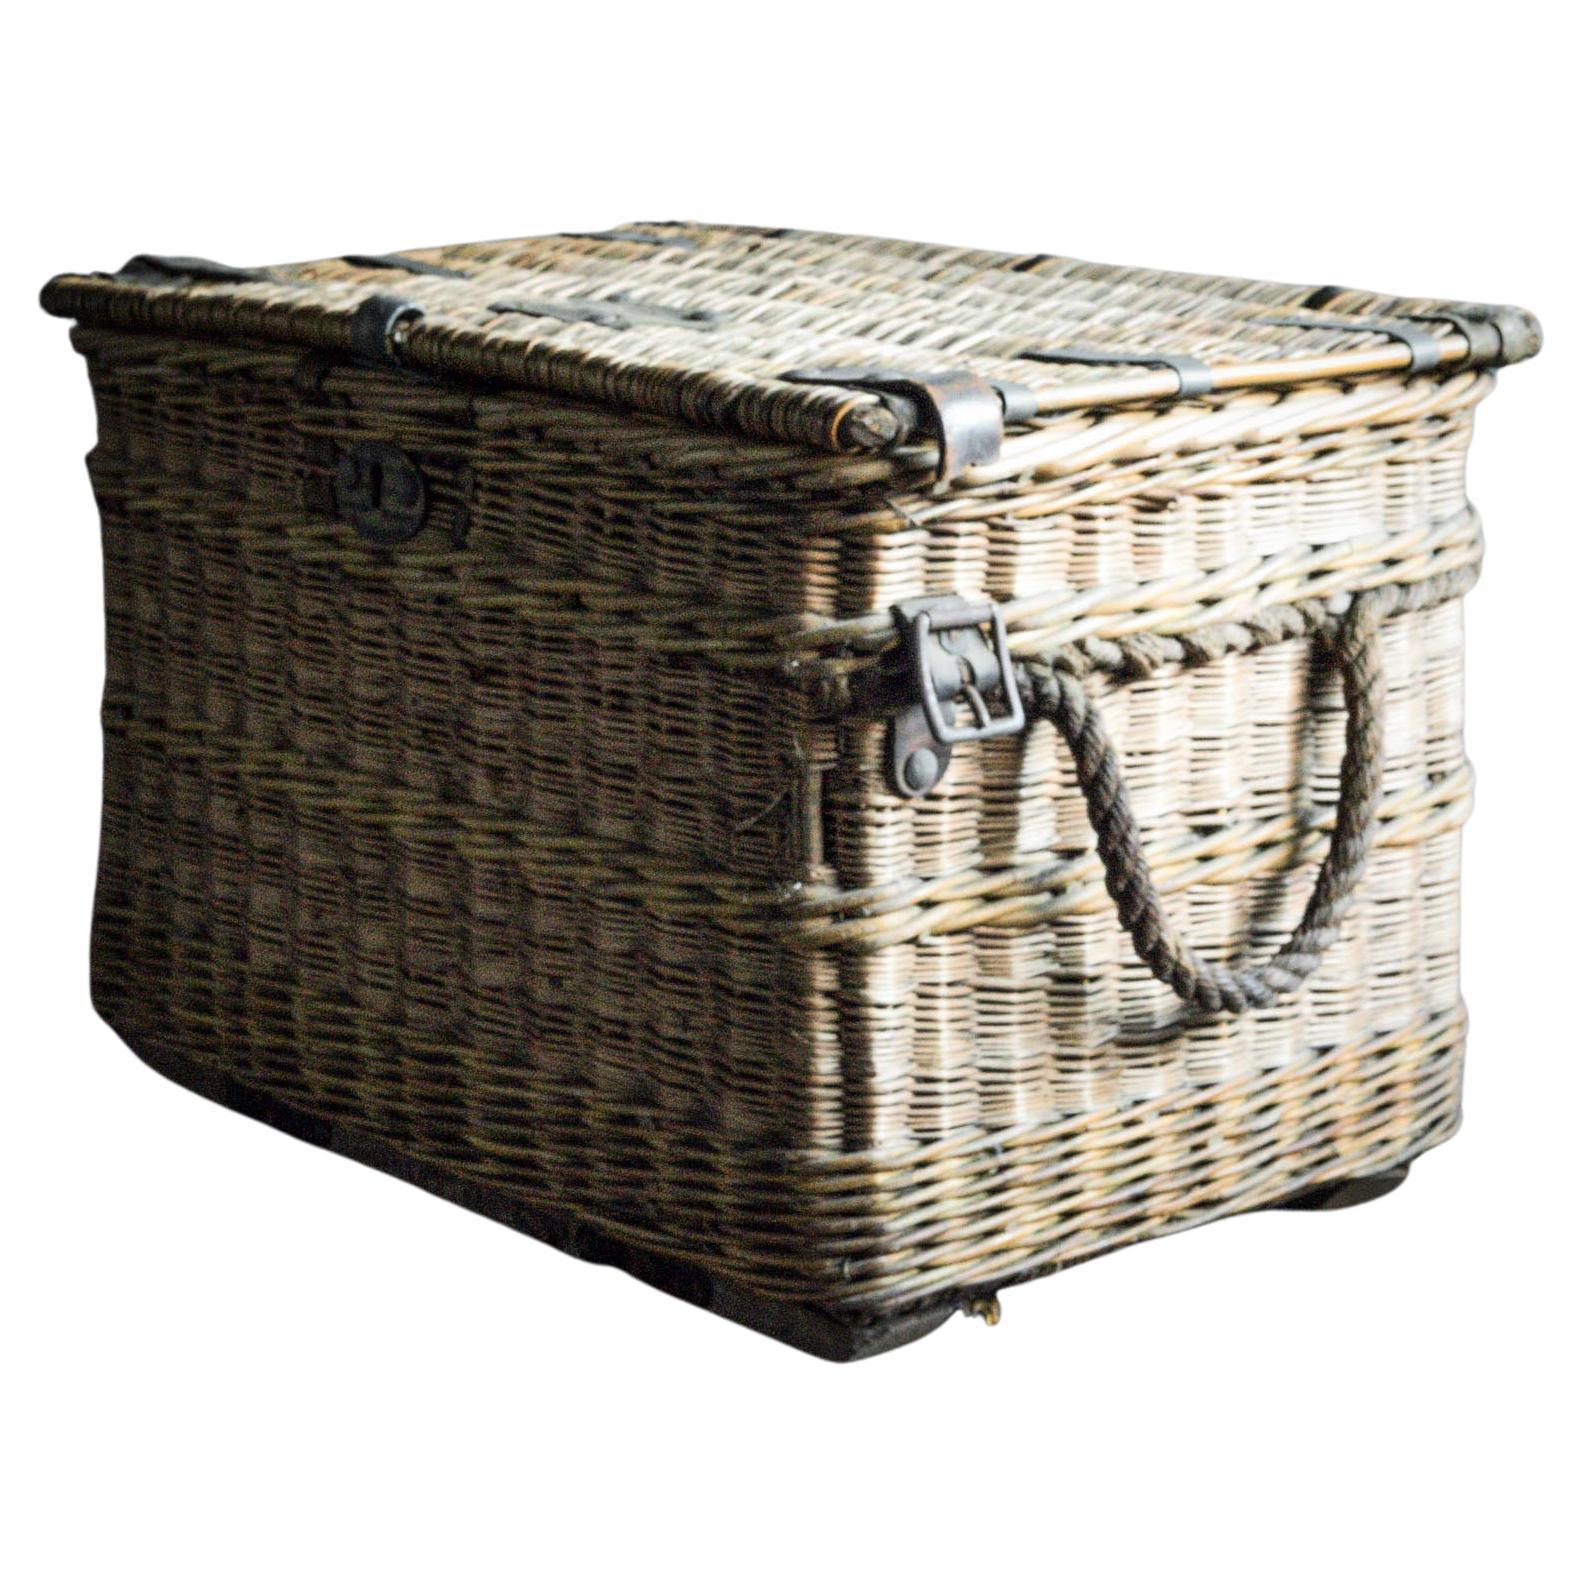 What is the best laundry basket?